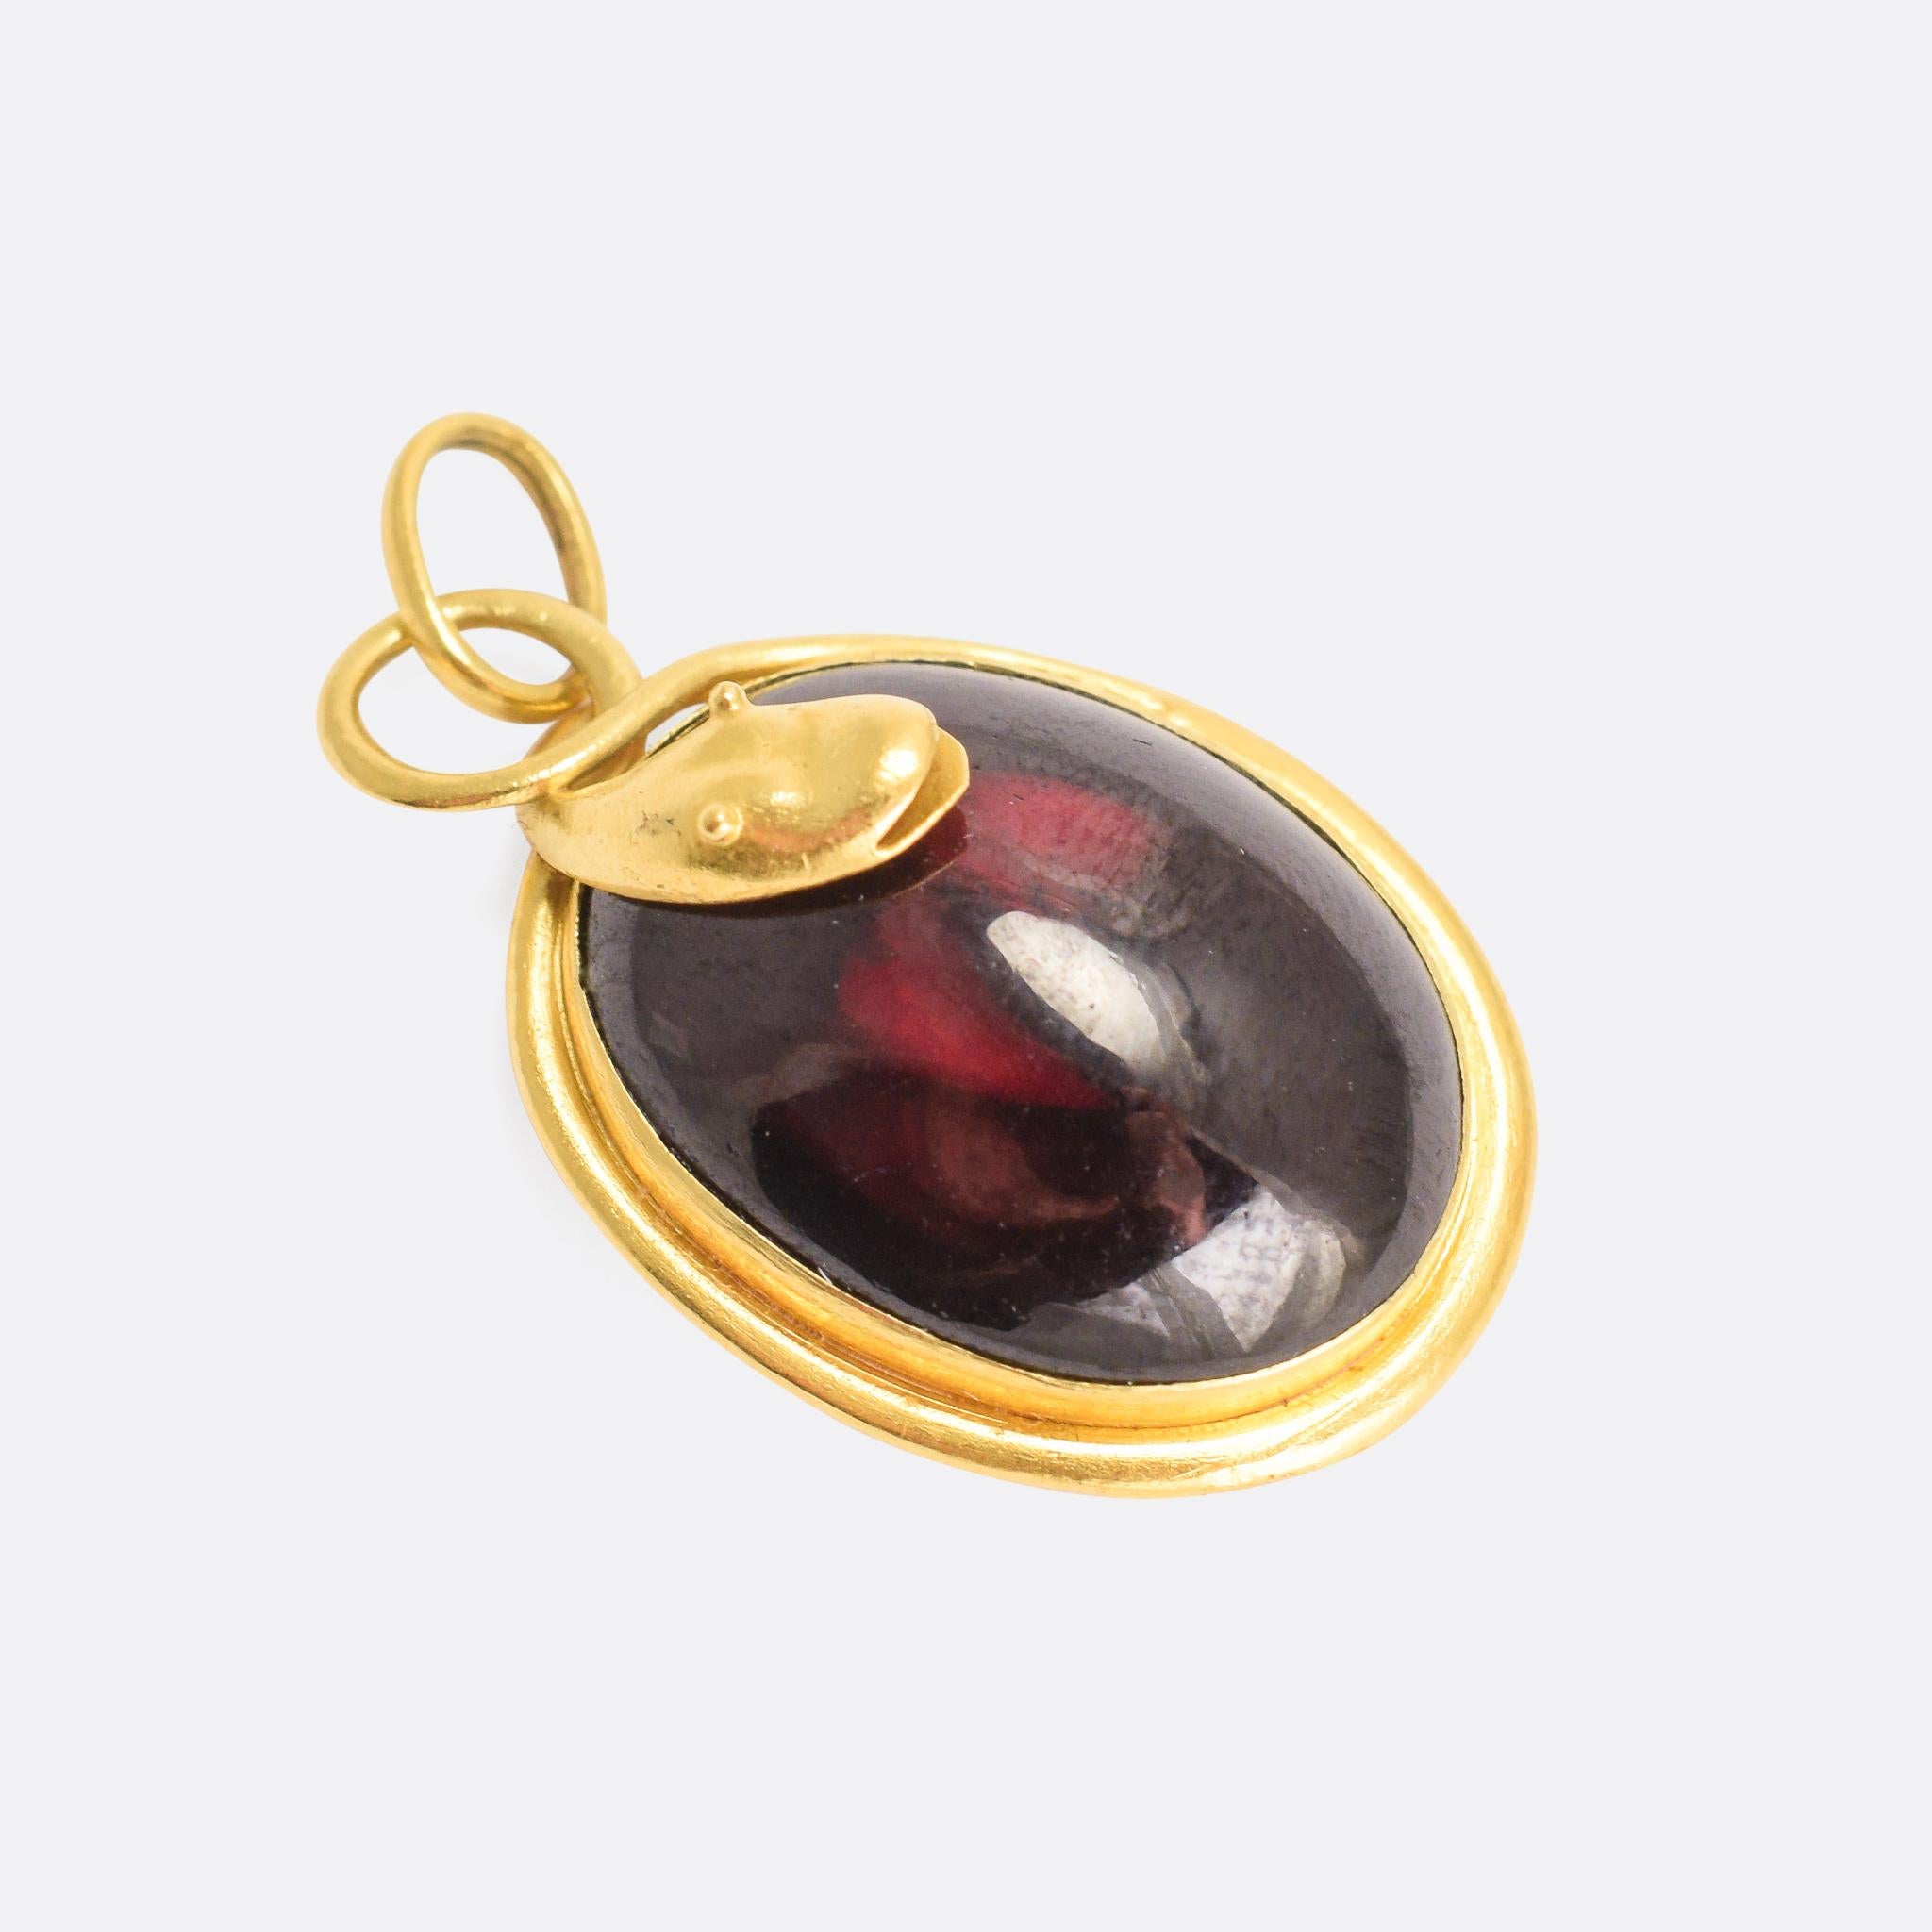 A gorgeous mid-Victorian pendant modelled as a cartoonish snake coiled around a large oval garnet cabochon prize. The stone is foil-backed, meaning that the light reflects back through it showing off the deep red colour. Modelled in 15k yellow gold,